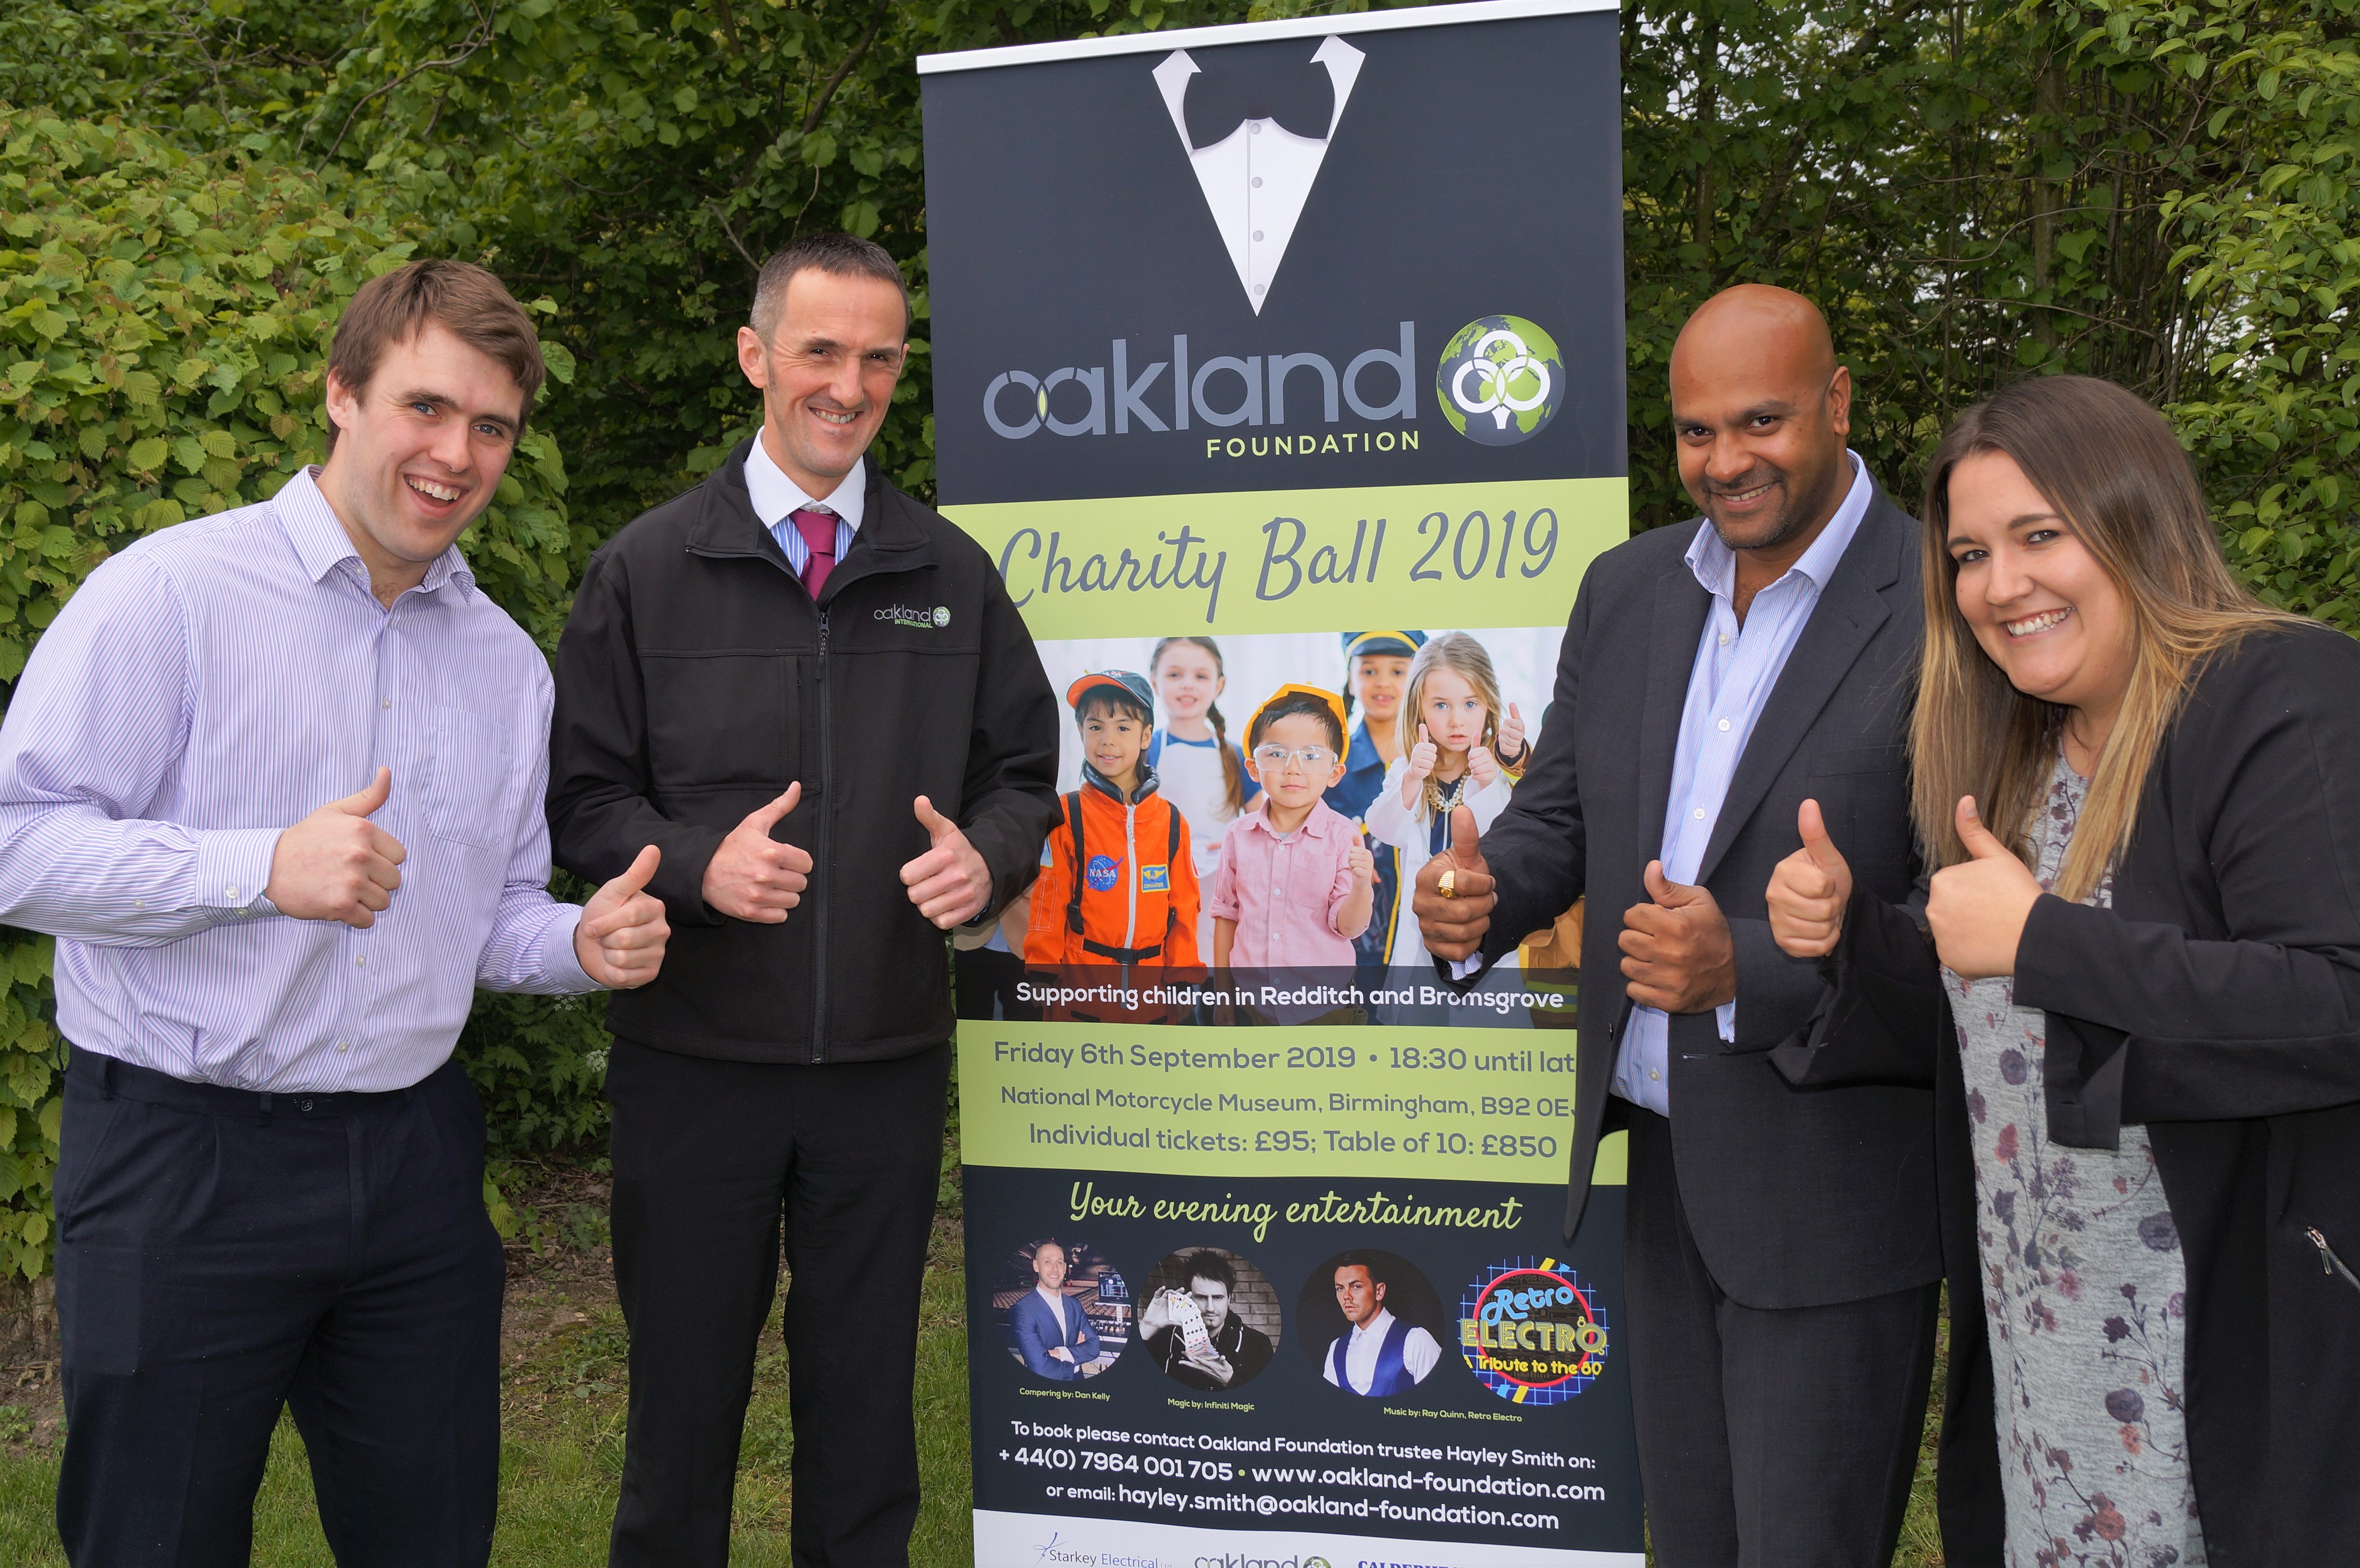 Business Community Lends its Support to Upcoming Charity Ball